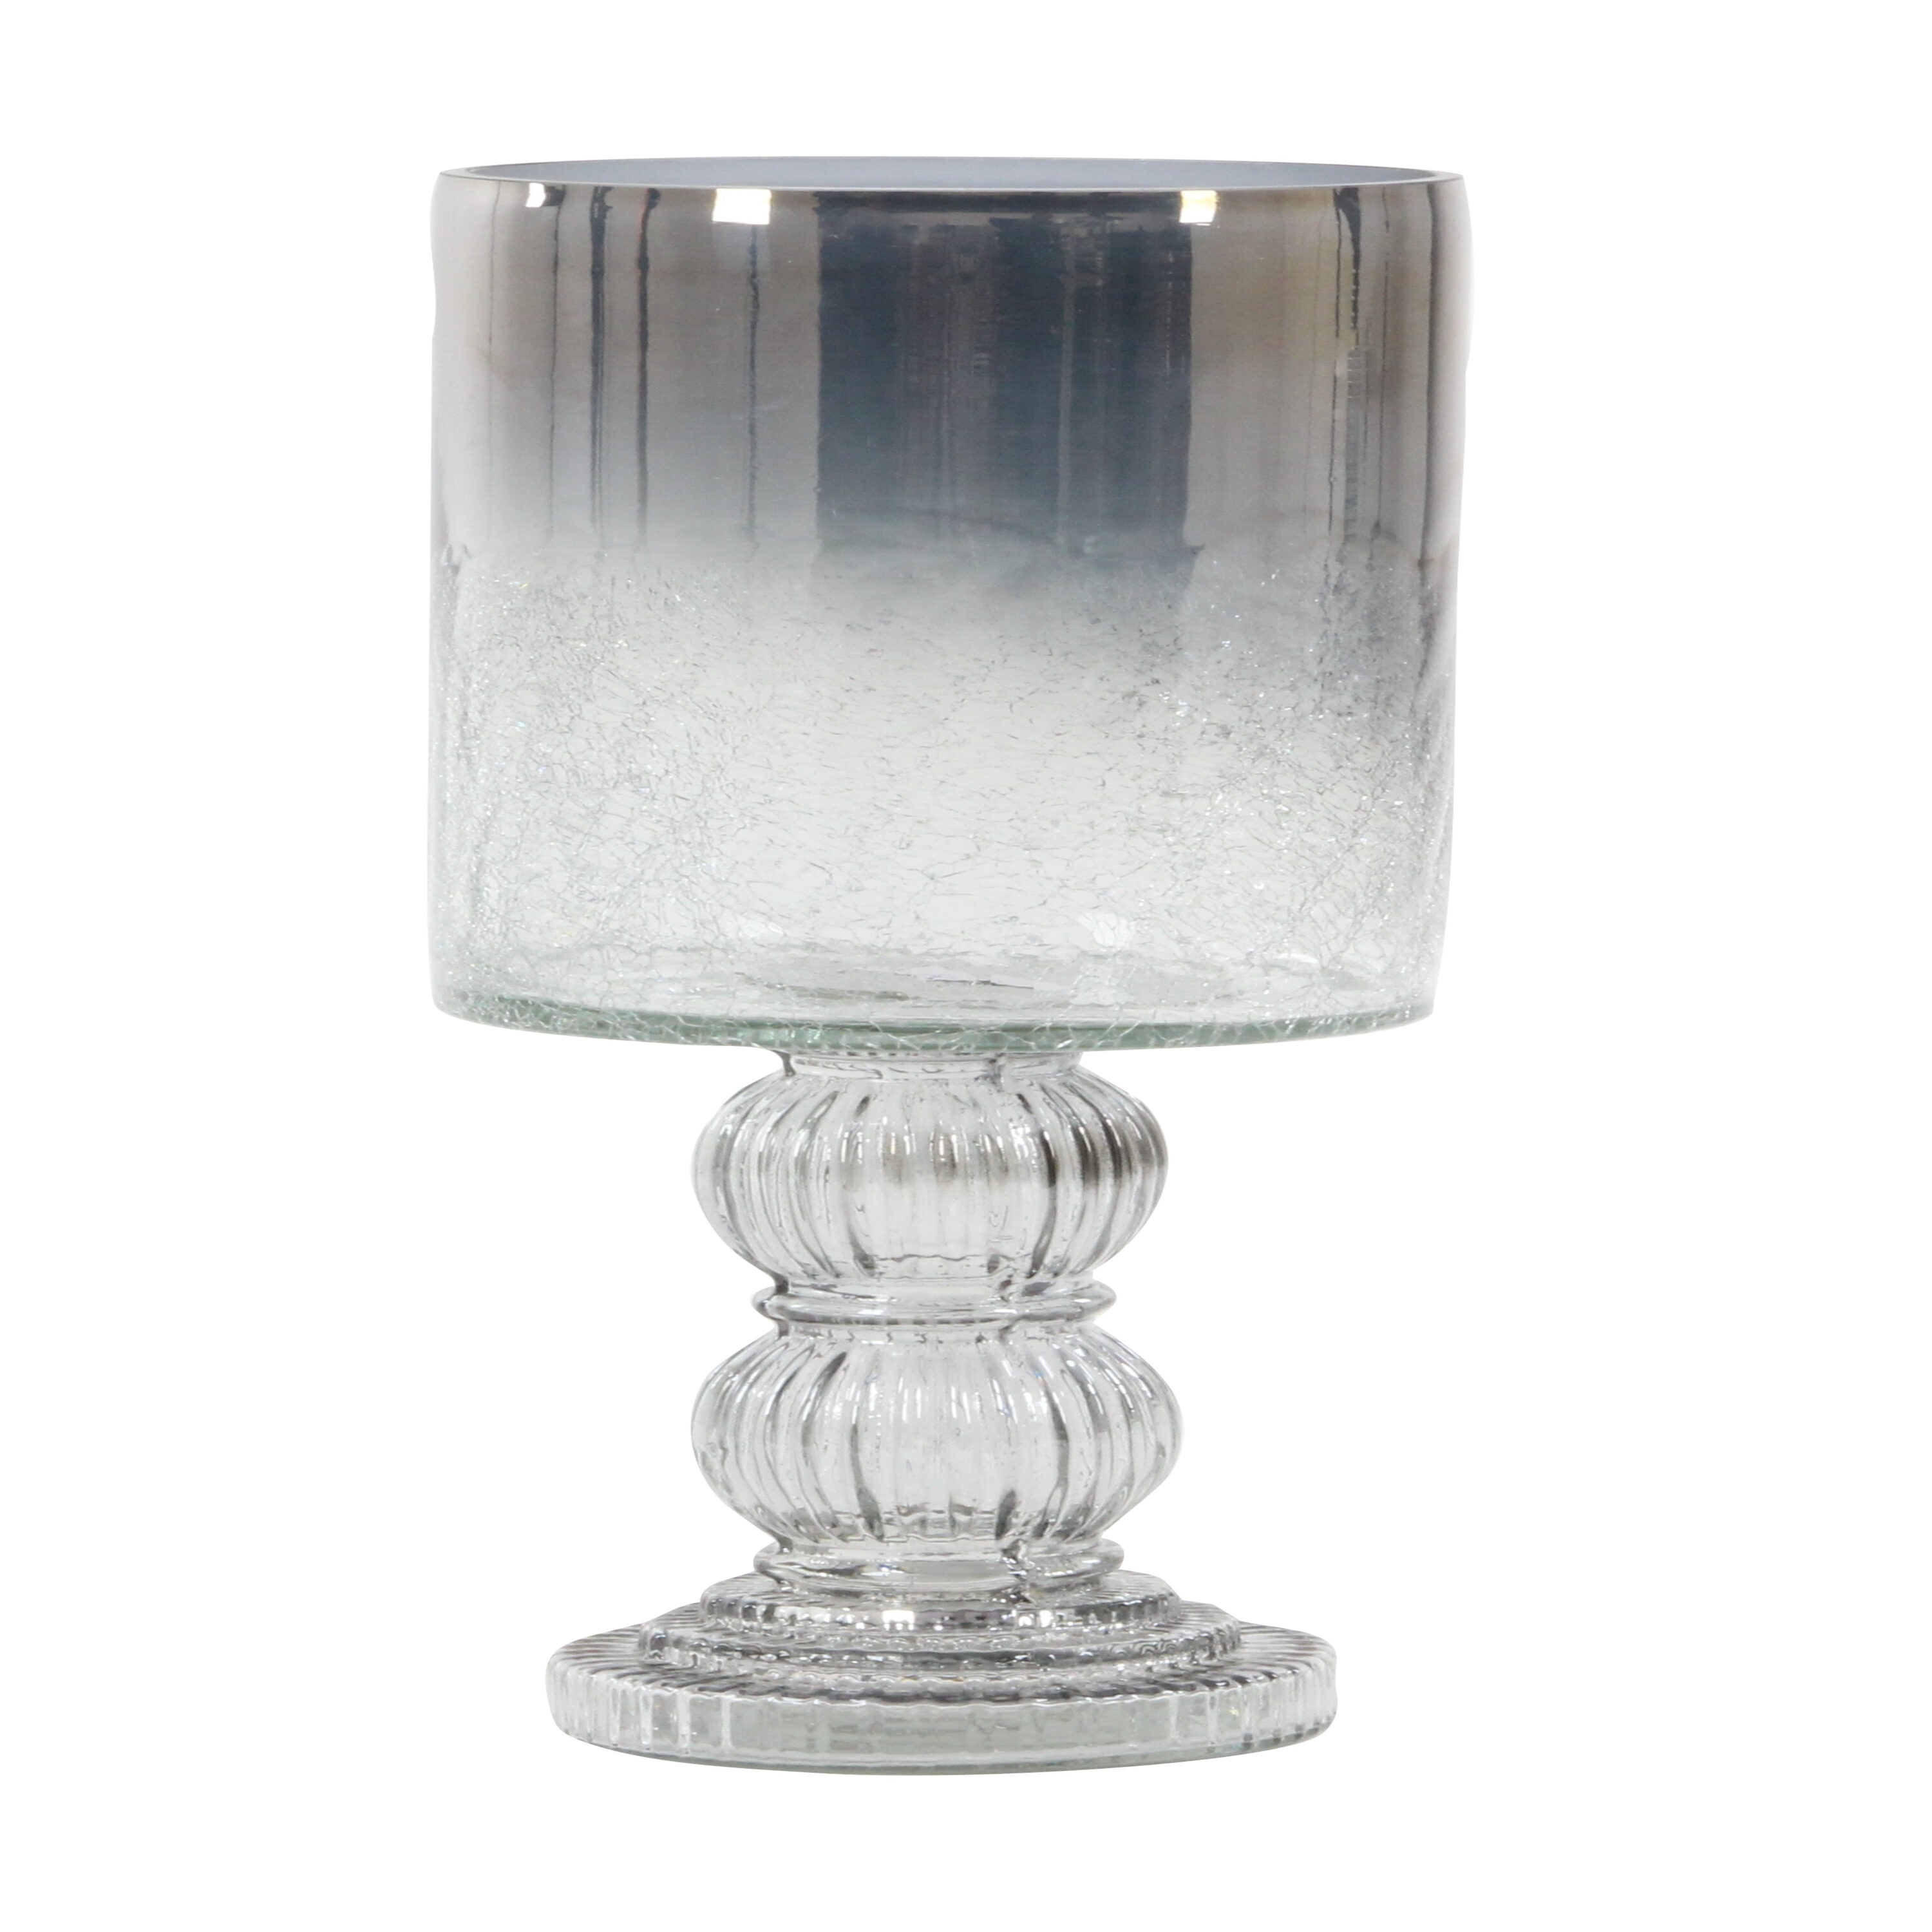 Grayson Lane 1 Candle Glass Hurricane Candle Holder in the Candle ...